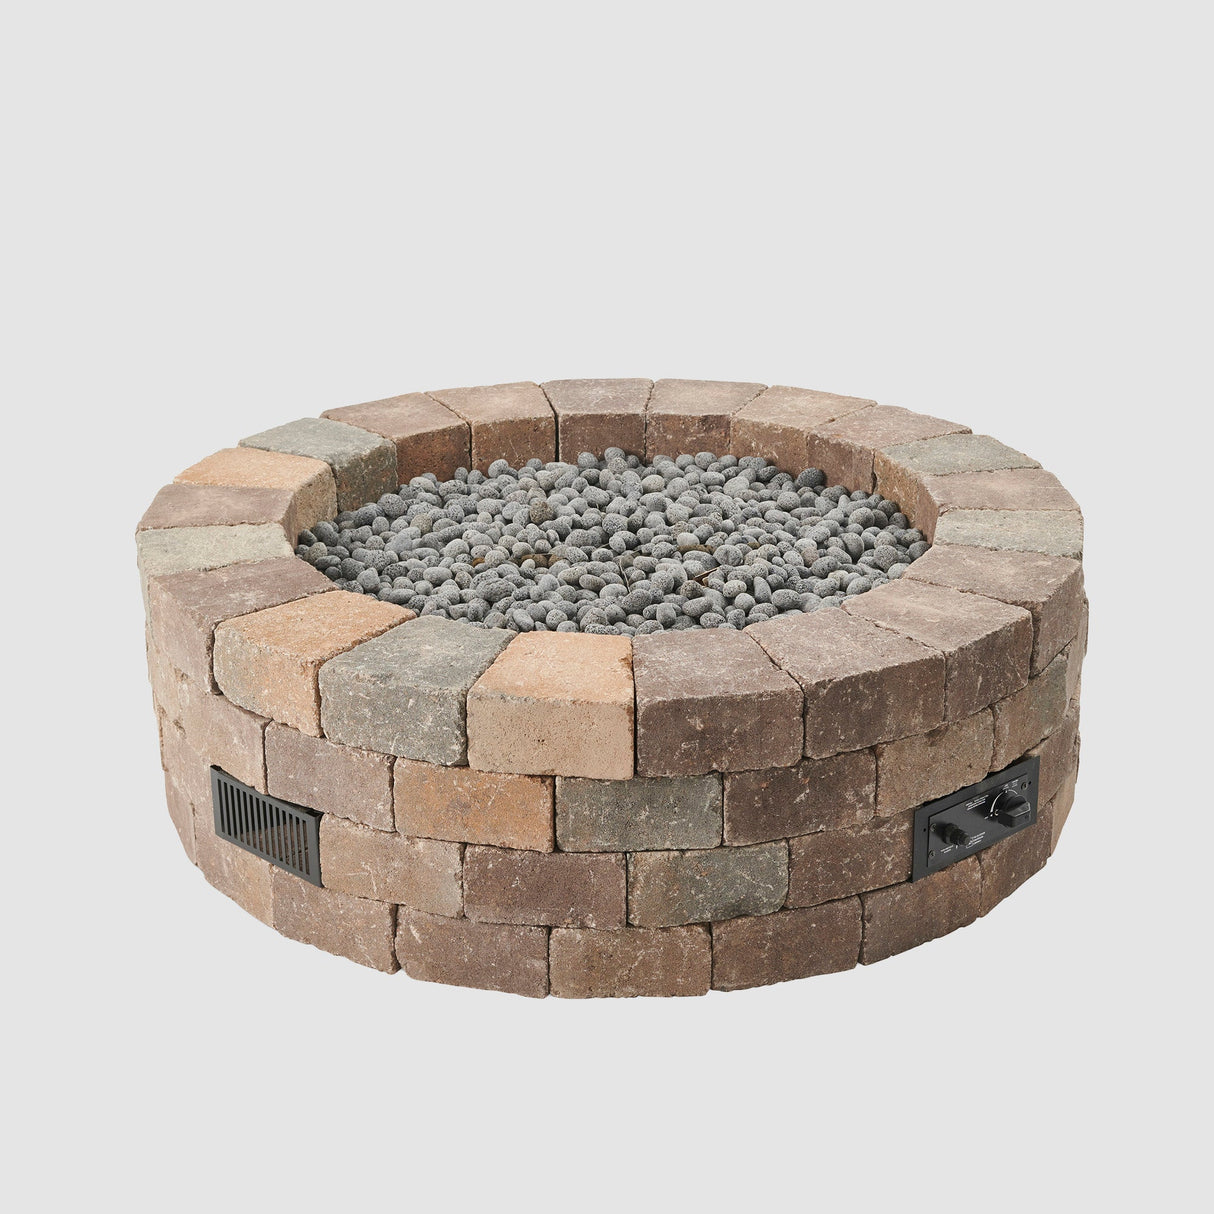 Lava rocks in the middle of a Bronson Block Round Gas Fire Pit Kit